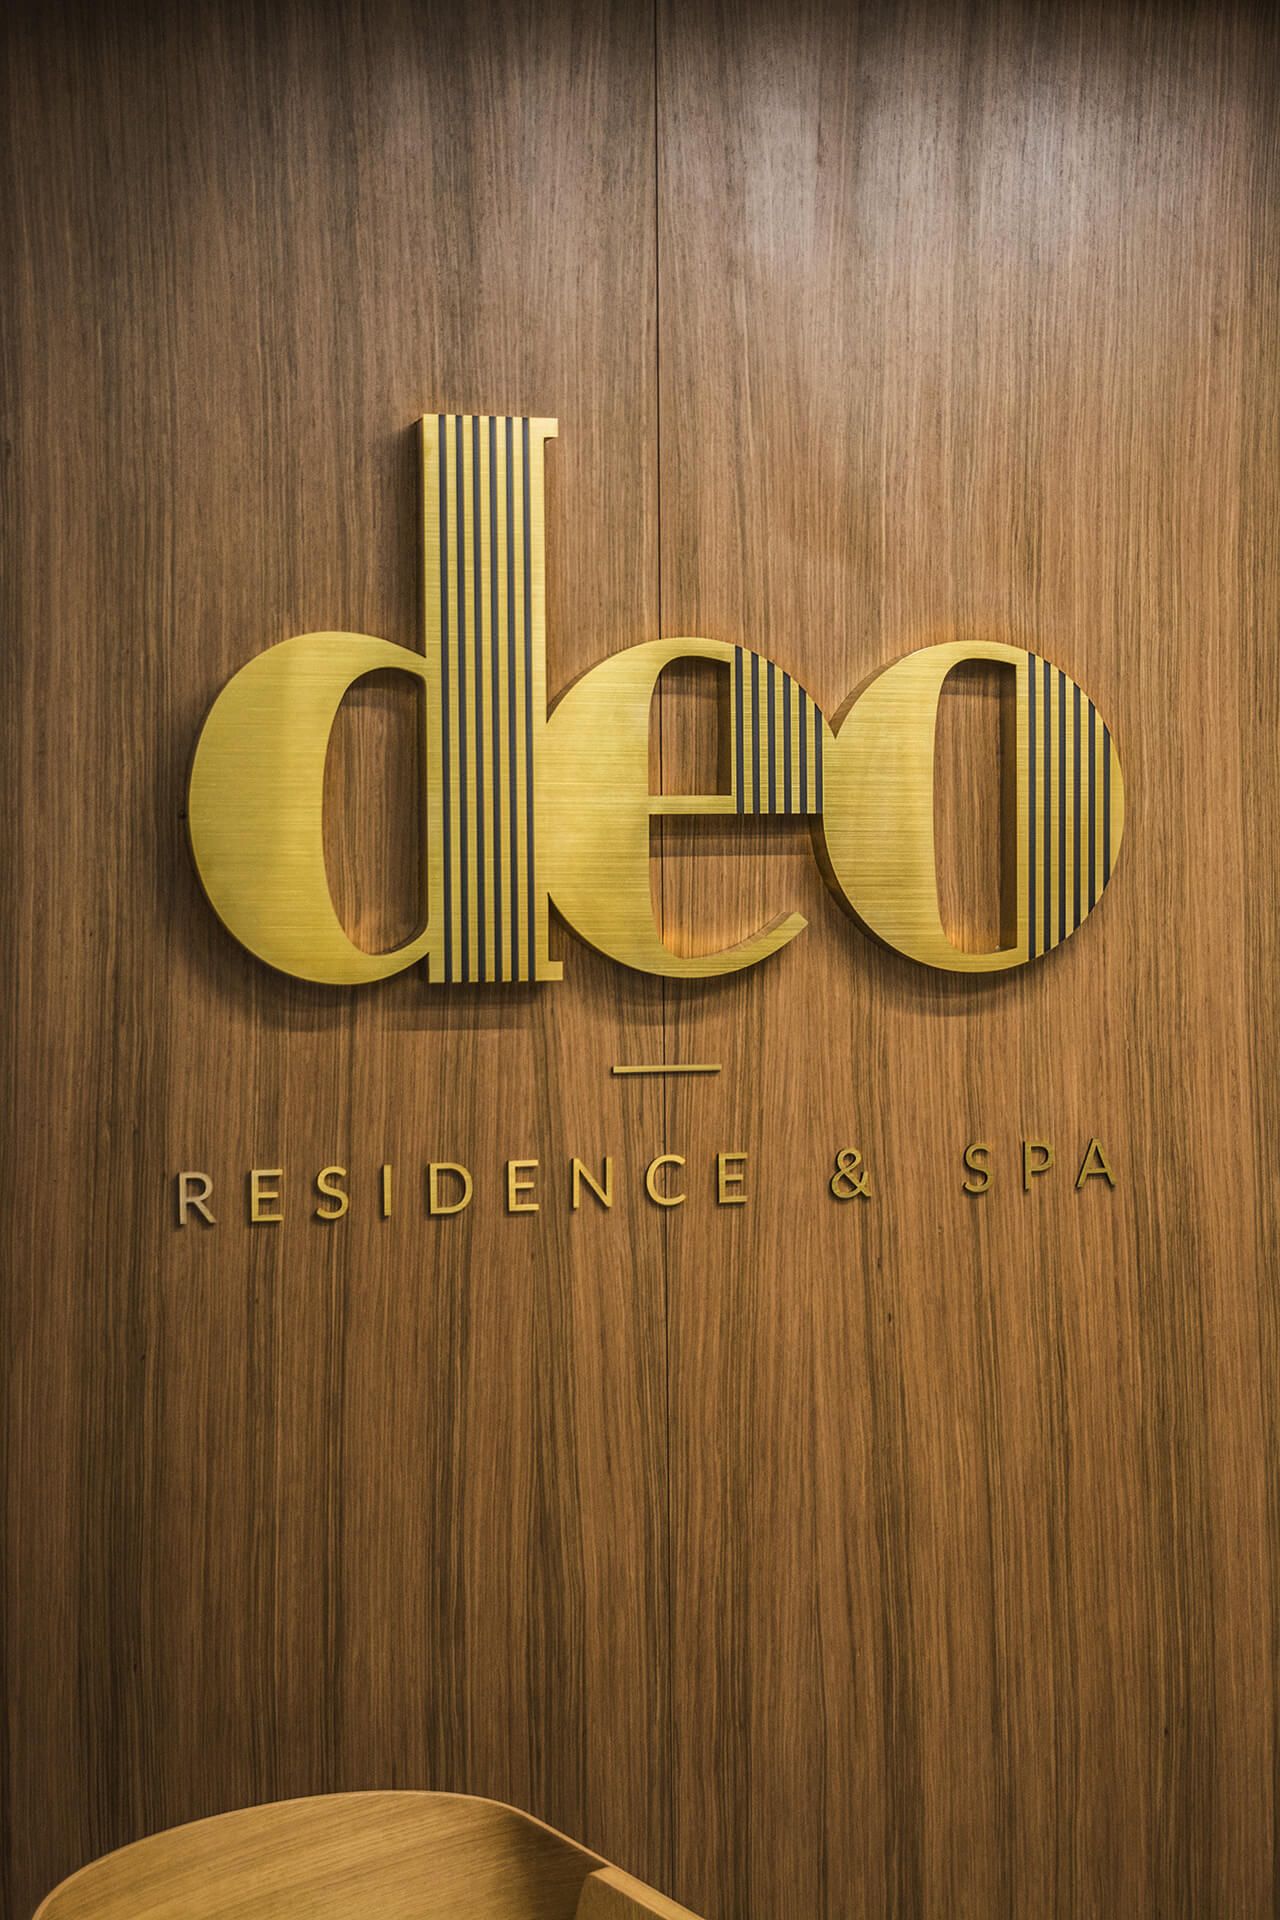 deo residence deo hotel spa - deo-residence-liters-from-solid-steel-brushed-lettering-over-the-entry-to-the-office-building-liters-at-height-mounted-to-the-wall-liters-on-sheets-liters-on-decks-logo-firm-gdansk